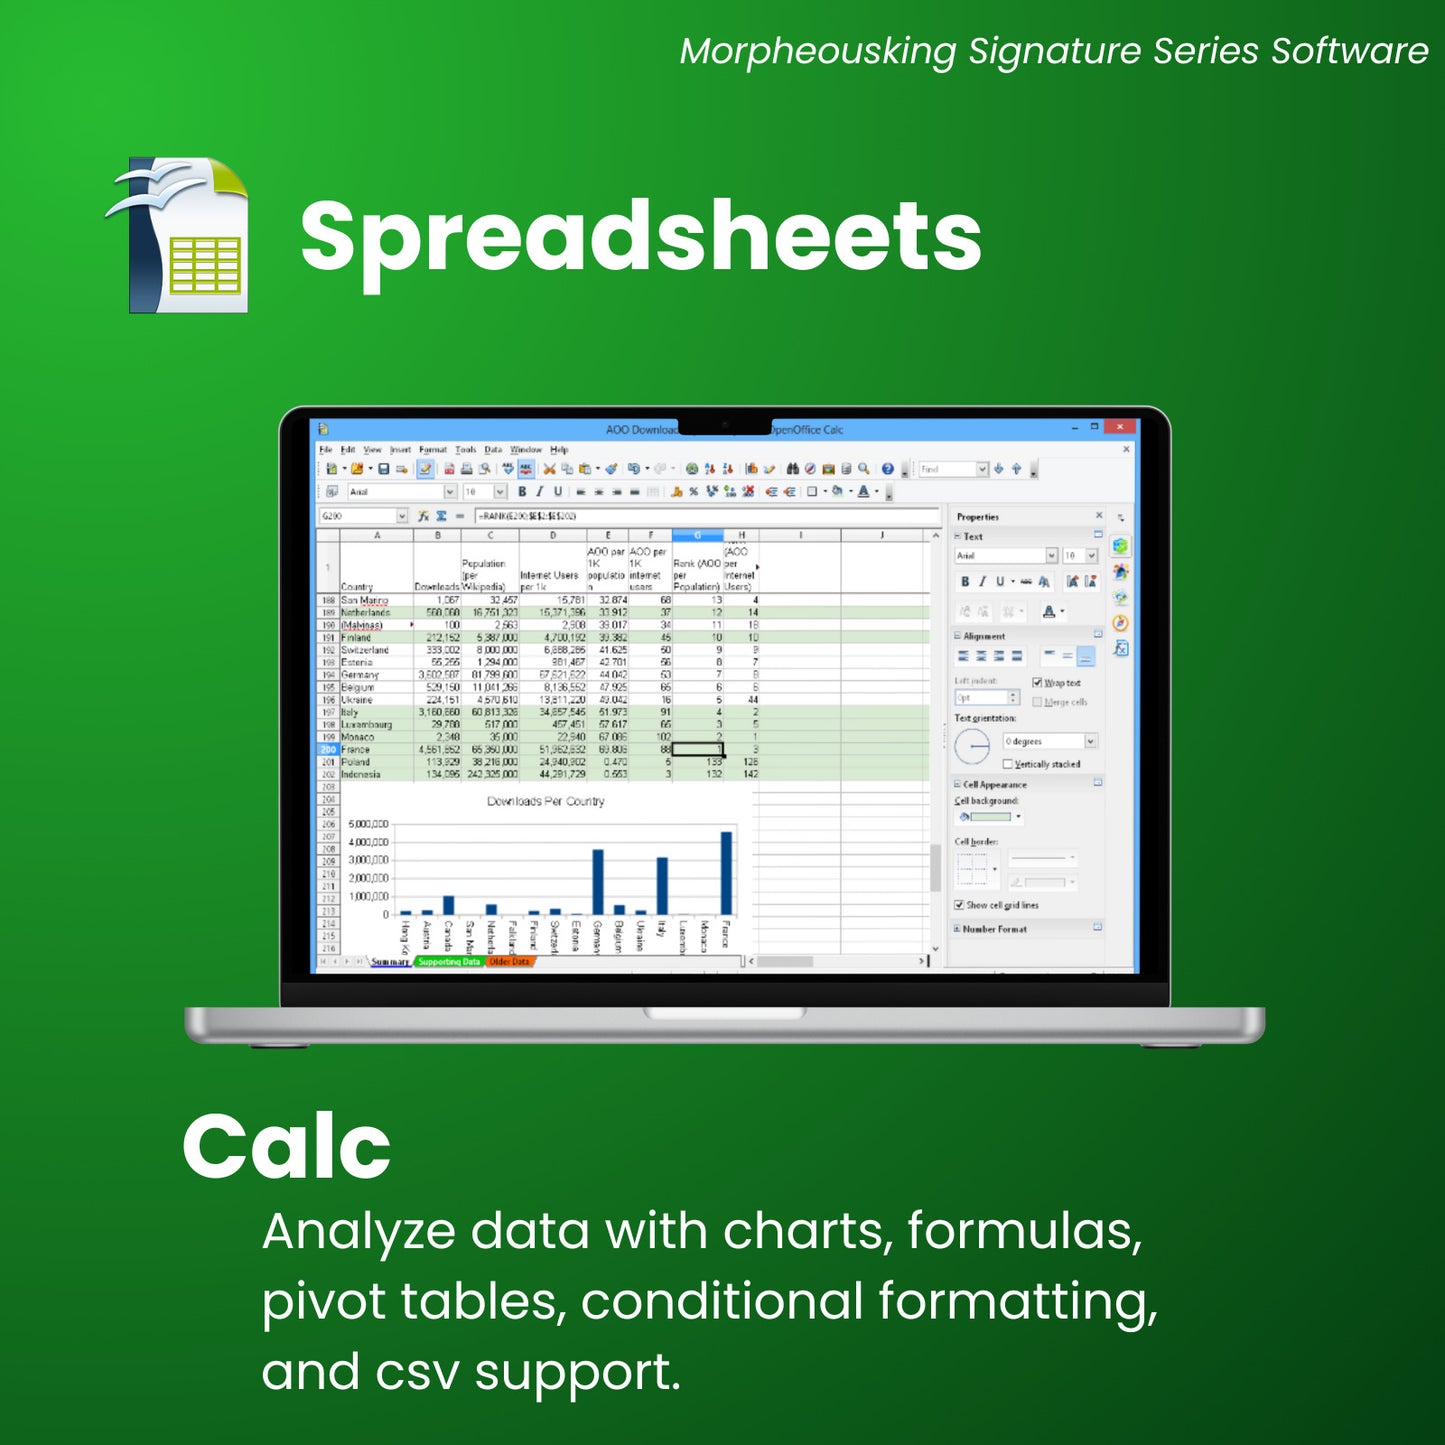 Apache Open Office Calc - Spreadsheets and Charts